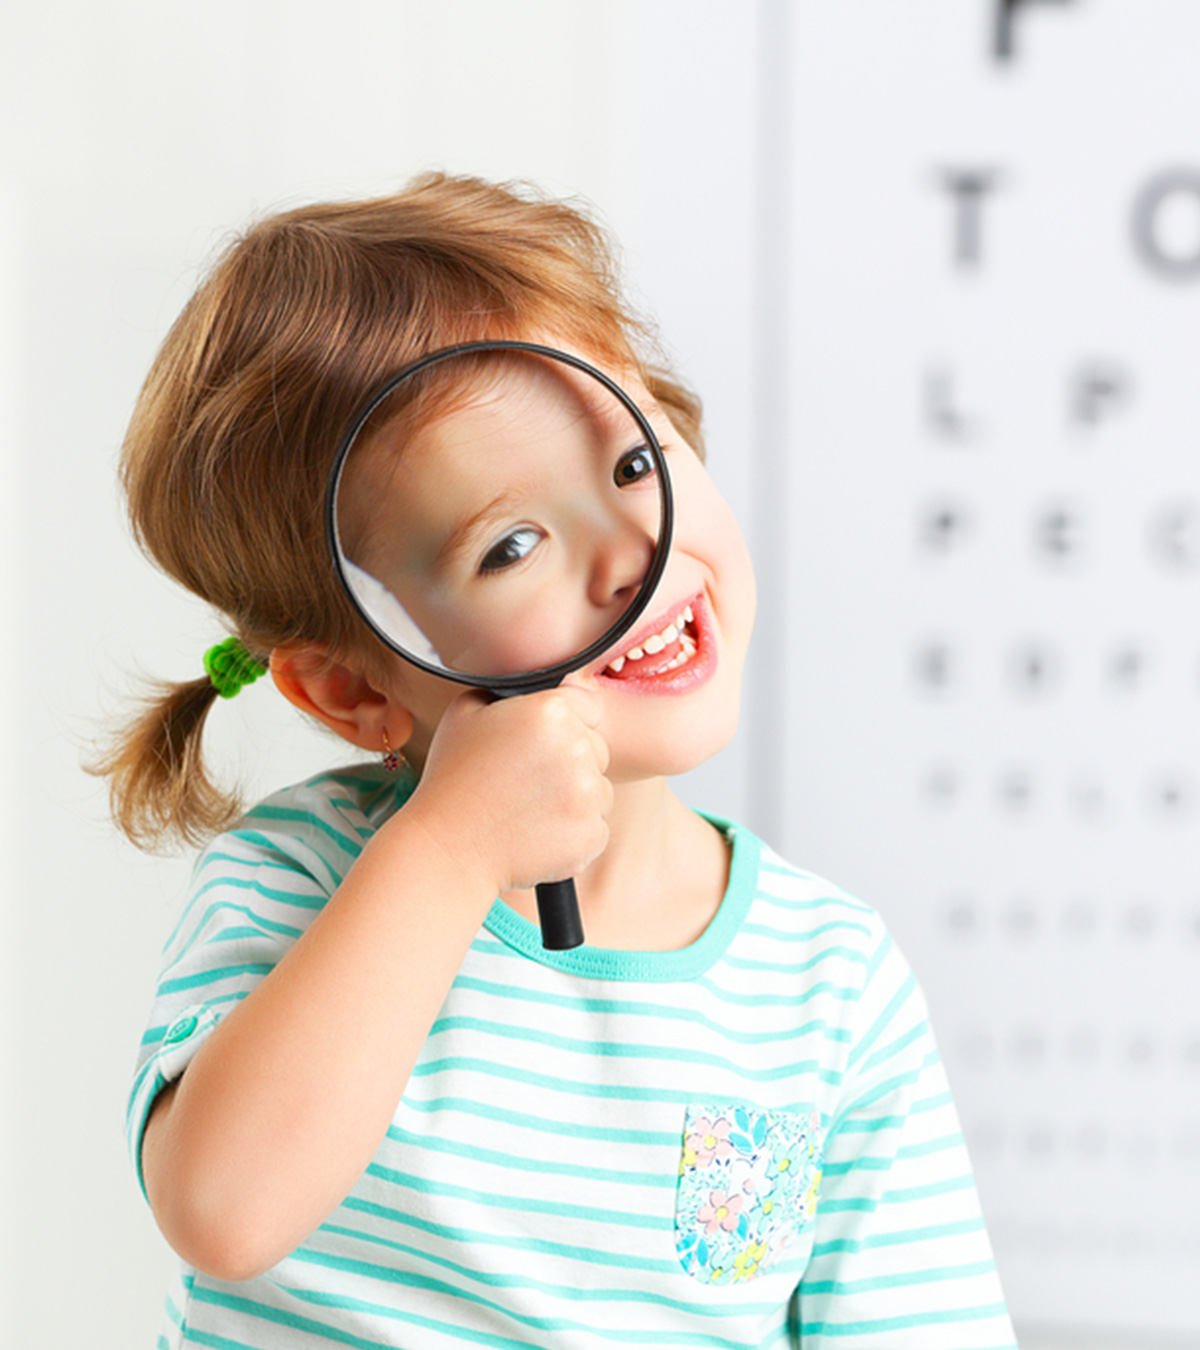 30 Amazing Facts About Human Eyes For Kids, With Diagrams